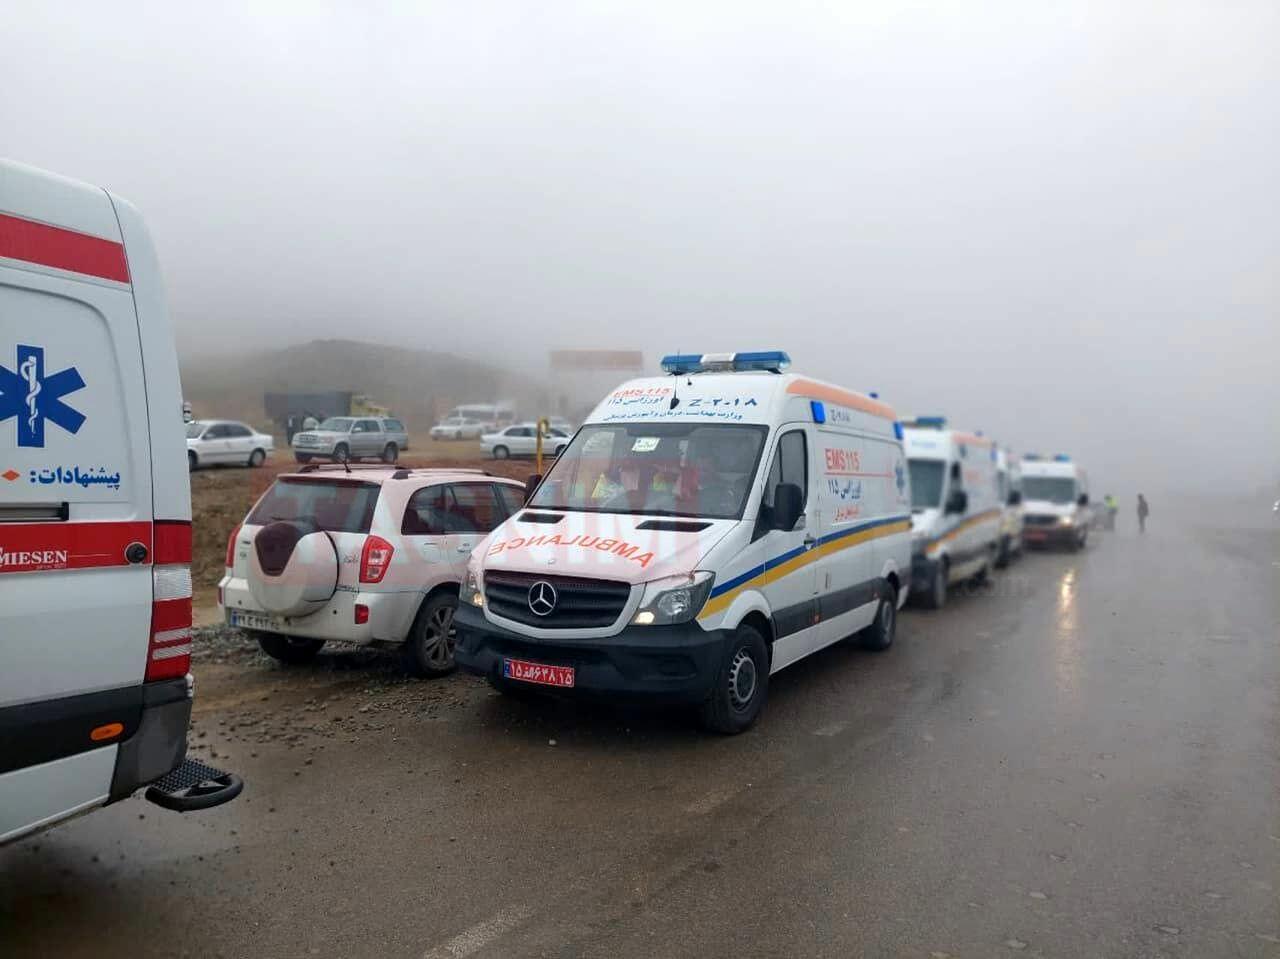 The latest weather conditions in the area of ​​the crash